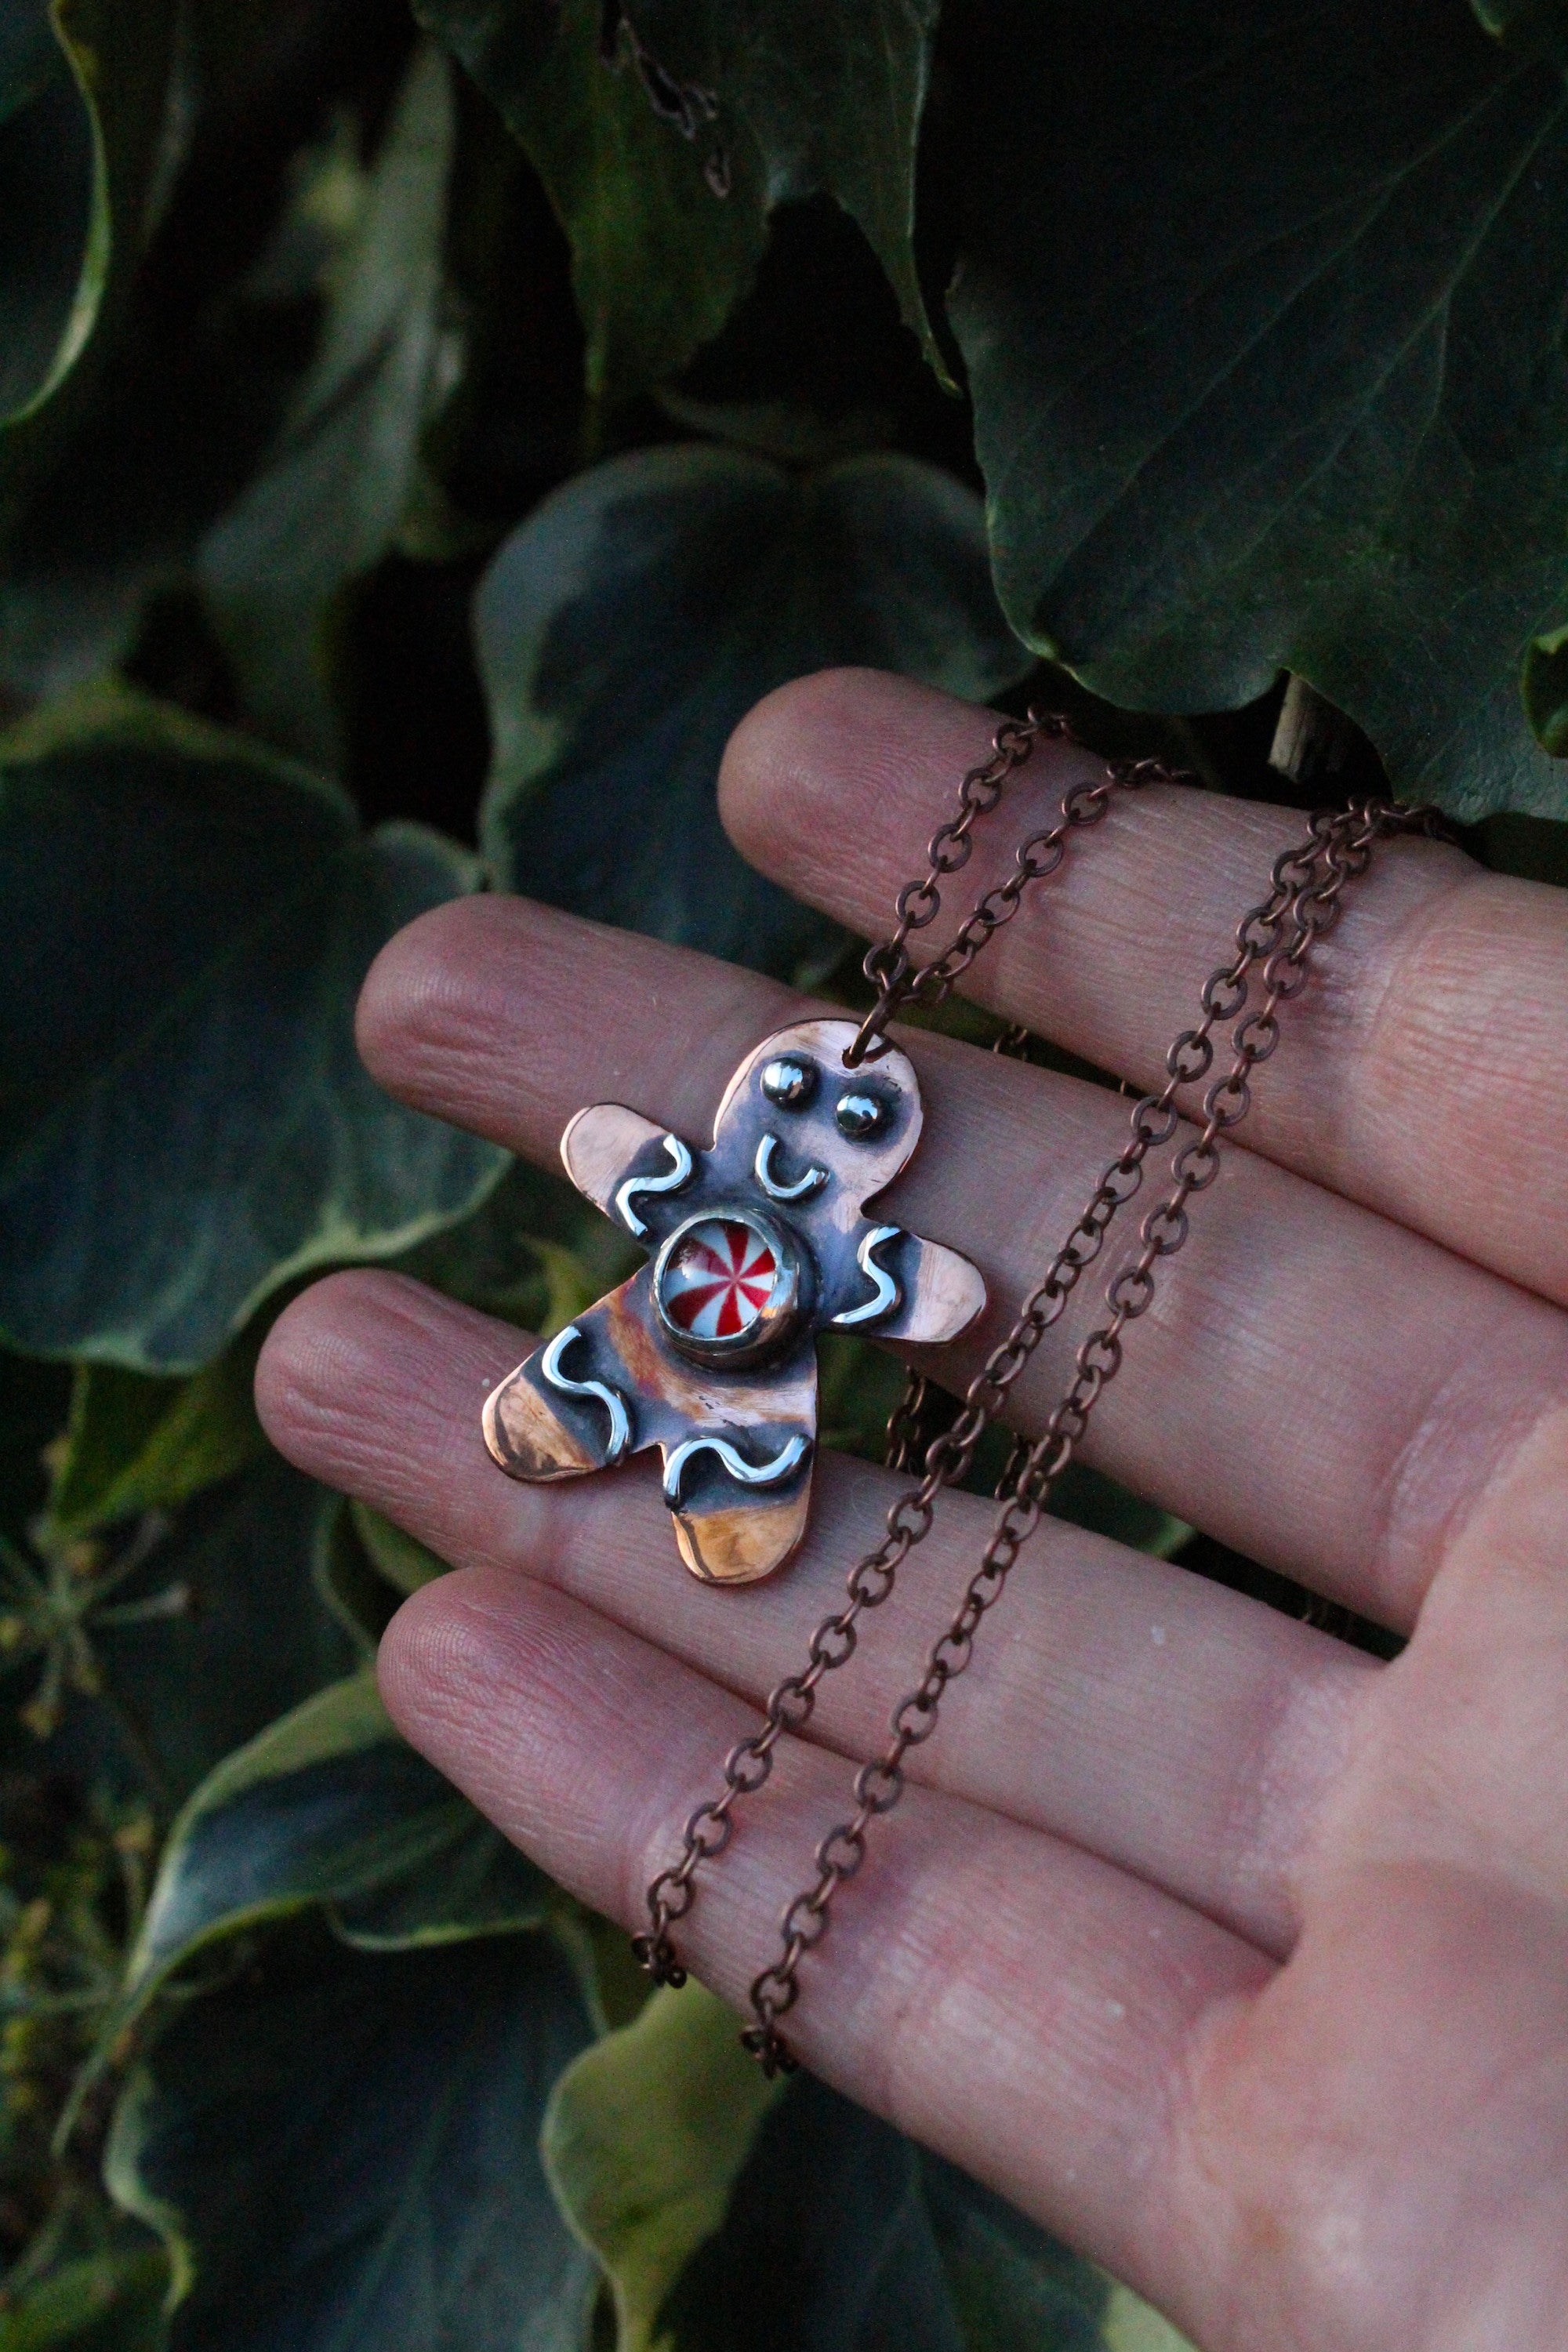 GINGERBREAD FRIEND - Handmade Copper Gingerbread Necklace with Glass Candy Gumdrops